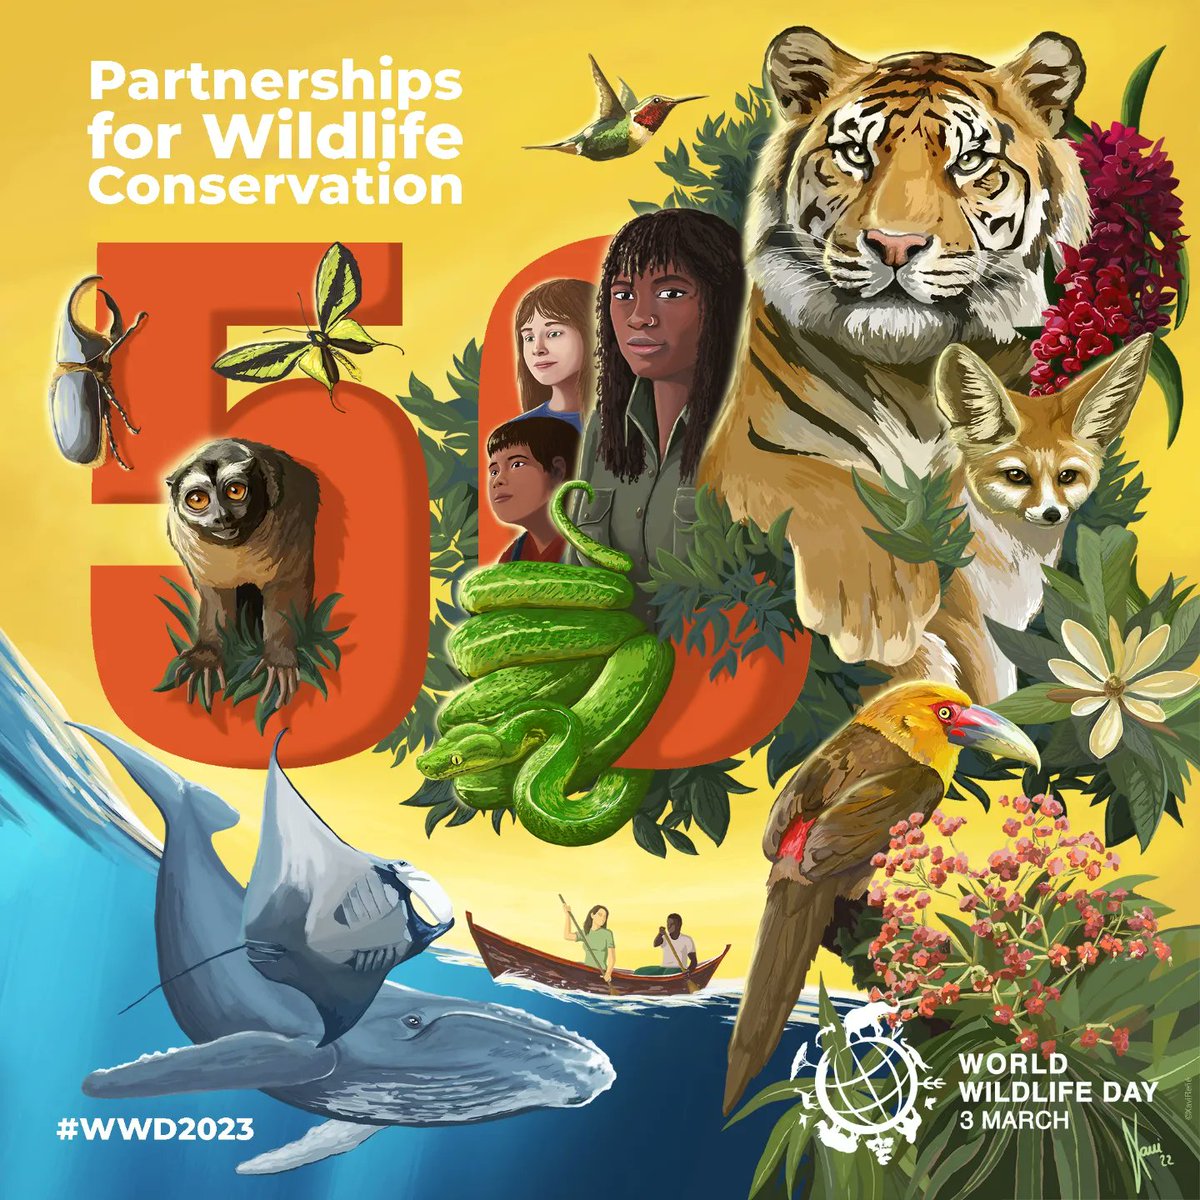 On March 3 #WorldWildlifeDay we celebrate the wild animals and plants, and their contribution to our lives and the health of the planet. This year is also the 50th anniversary of @CITES that guards wild species under threat from illegal trade. ￼ #CITES50 #WWD2023 #UNited4Land